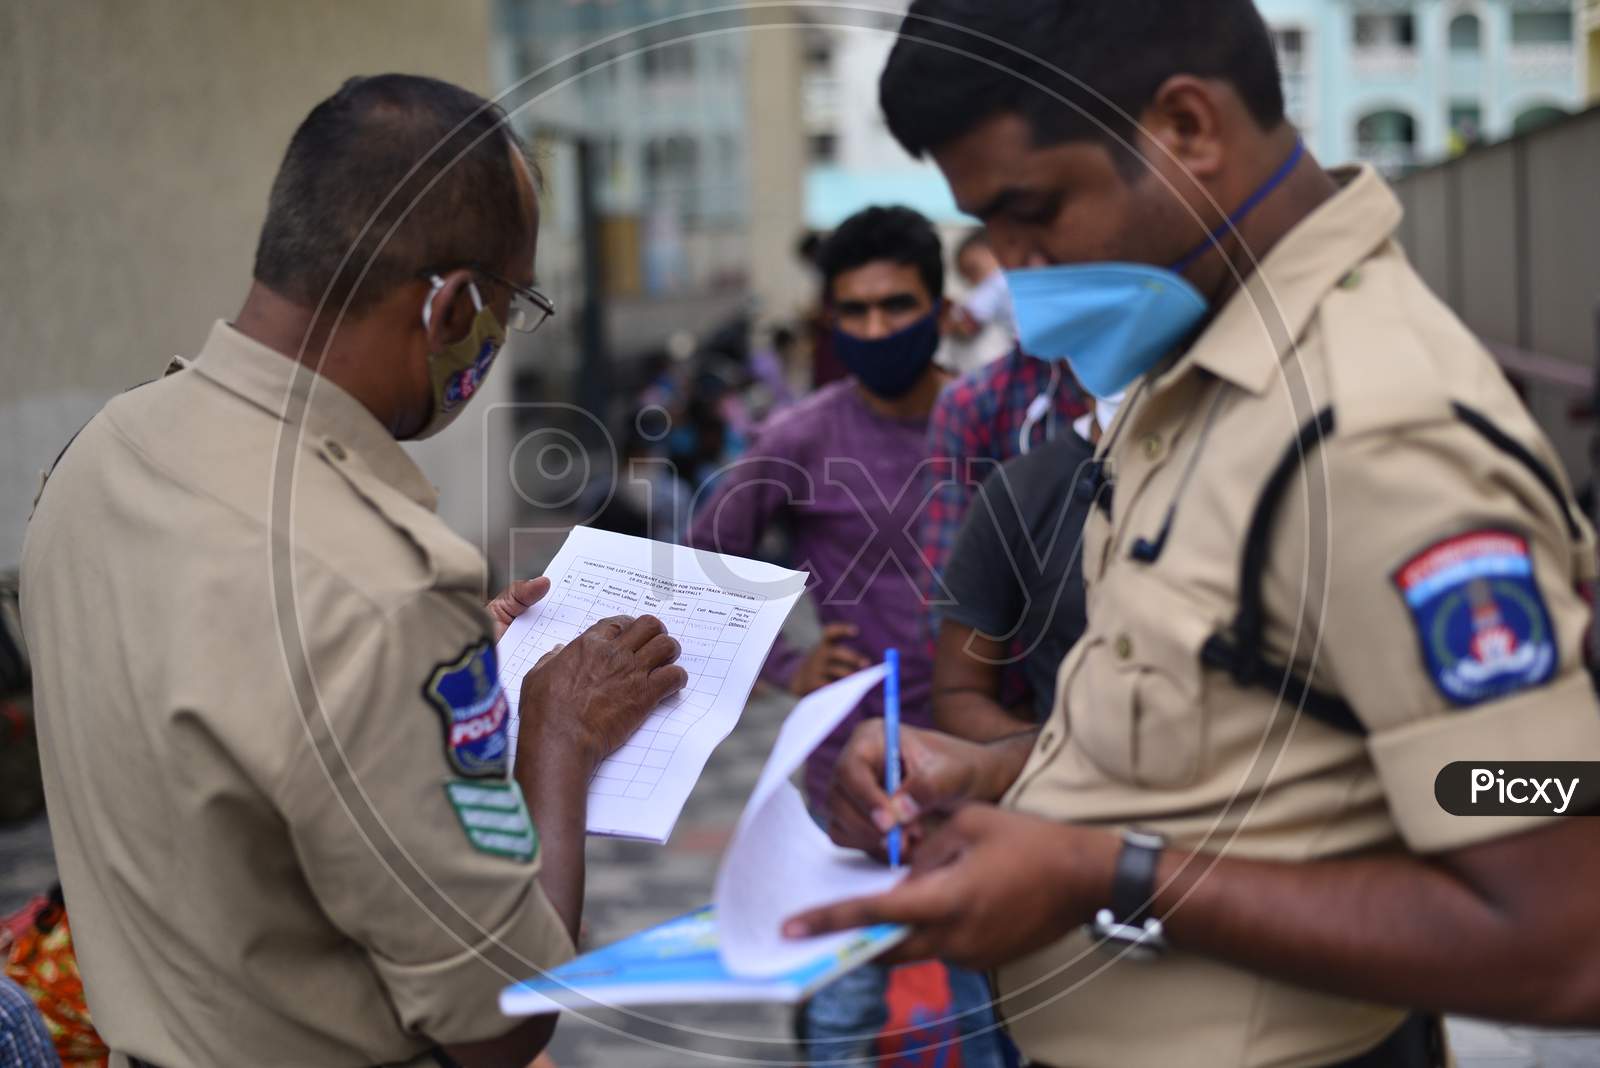 Cyberabad Police register the Migrant Workers from different states so that they can board a Shramik Special Train during an ongoing Nationwide Lockdown amid Coronavirus Pandemic, Kukatpally,Hyderabad, May 19,2020